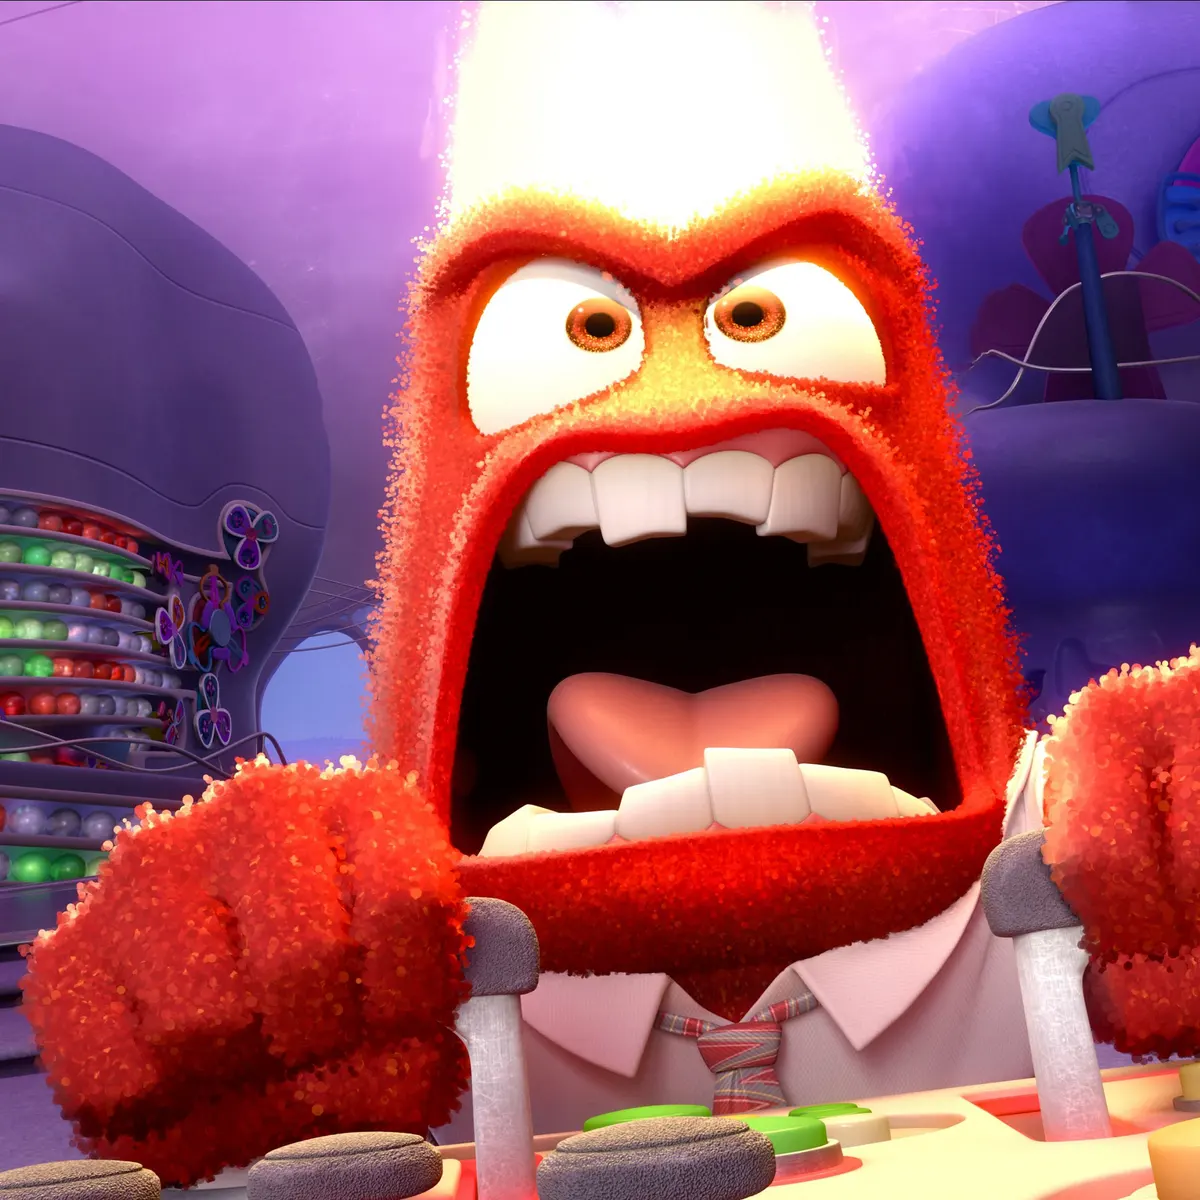 The character 'Anger' from the movie 'Inside Out'